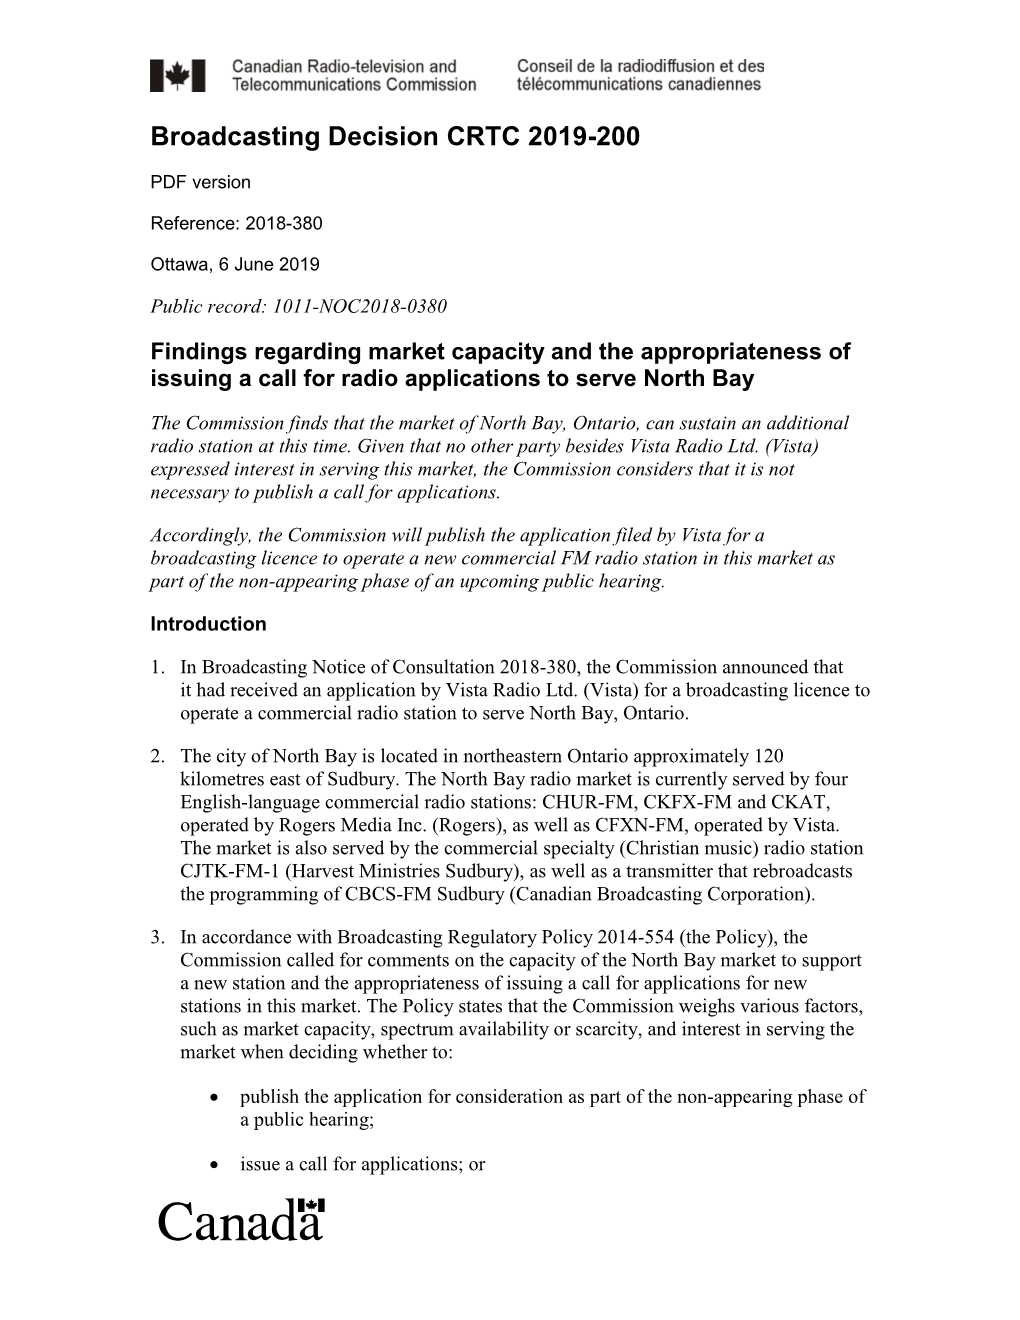 Findings Regarding Market Capacity and the Appropriateness of Issuing a Call for Radio Applications to Serve North Bay